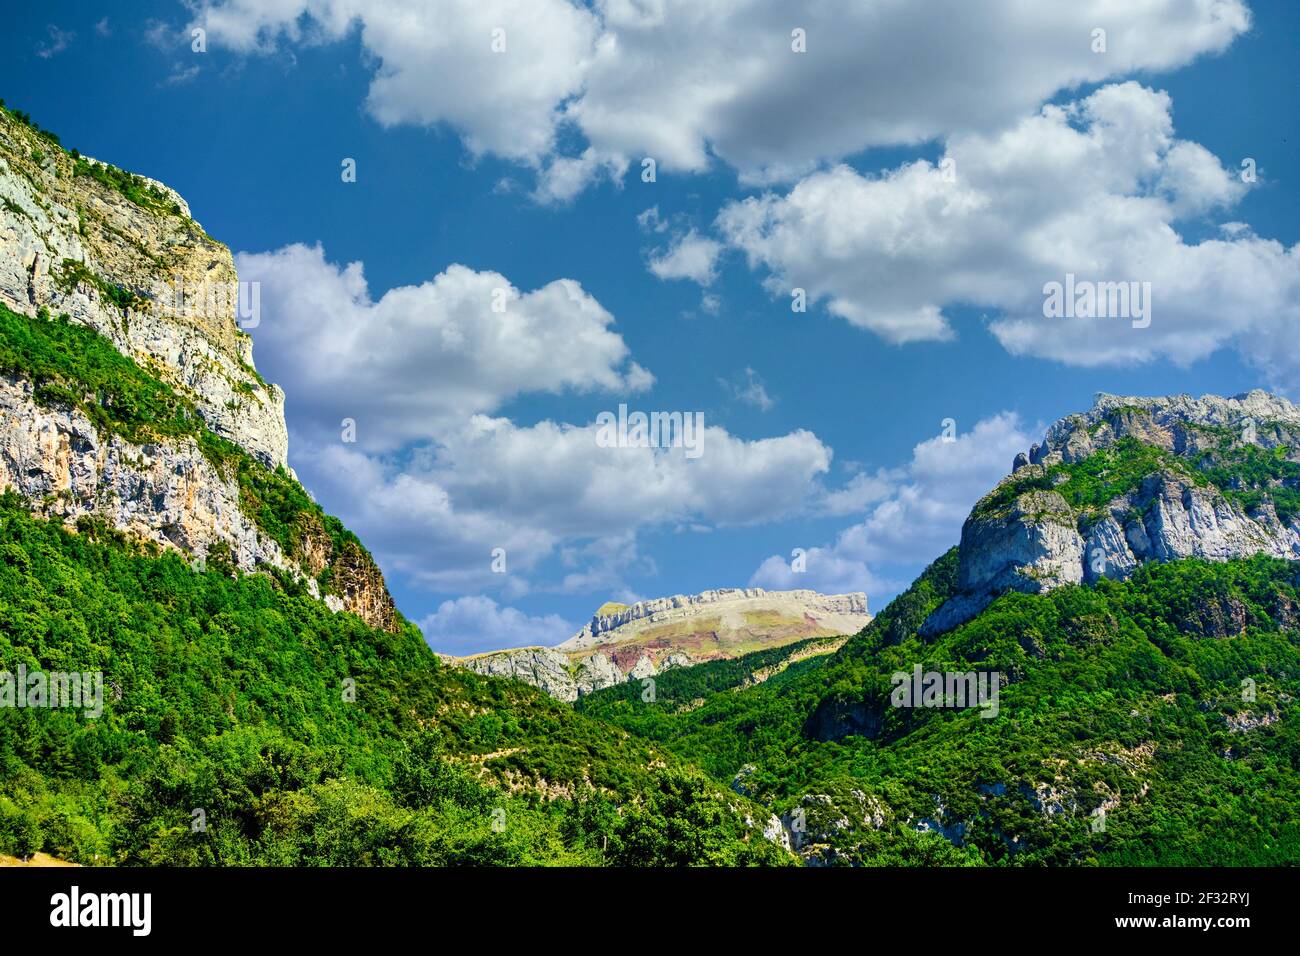 Mountains and forest landscape view. Stock Photo